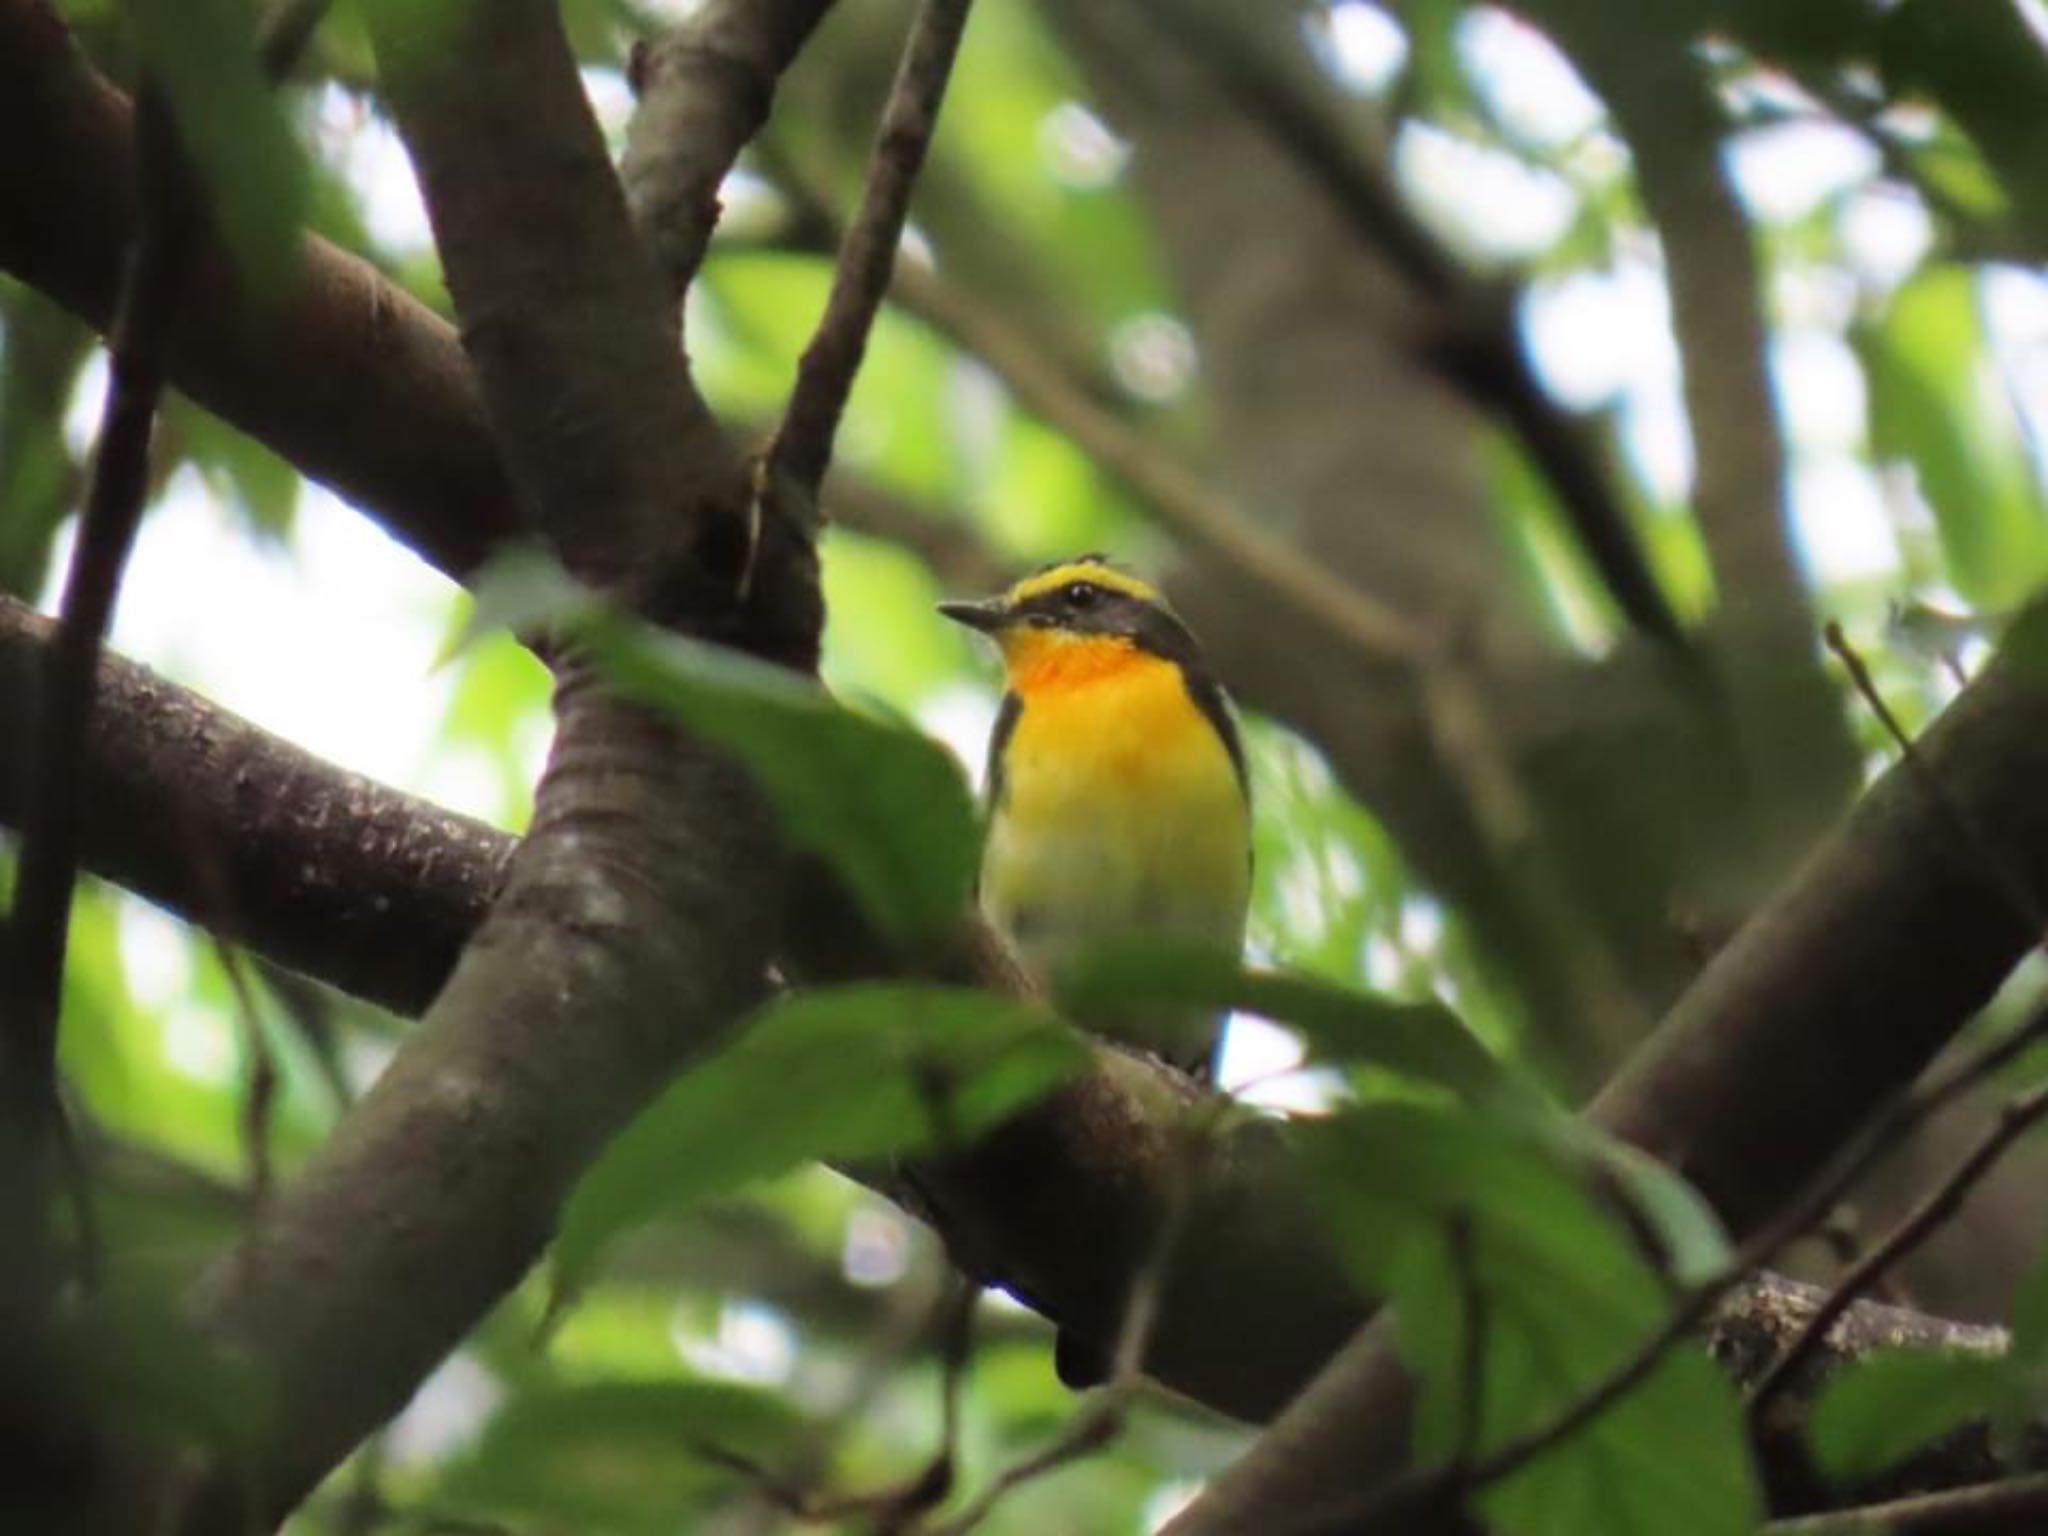 Photo of Narcissus Flycatcher at Osaka castle park by えりにゃん店長